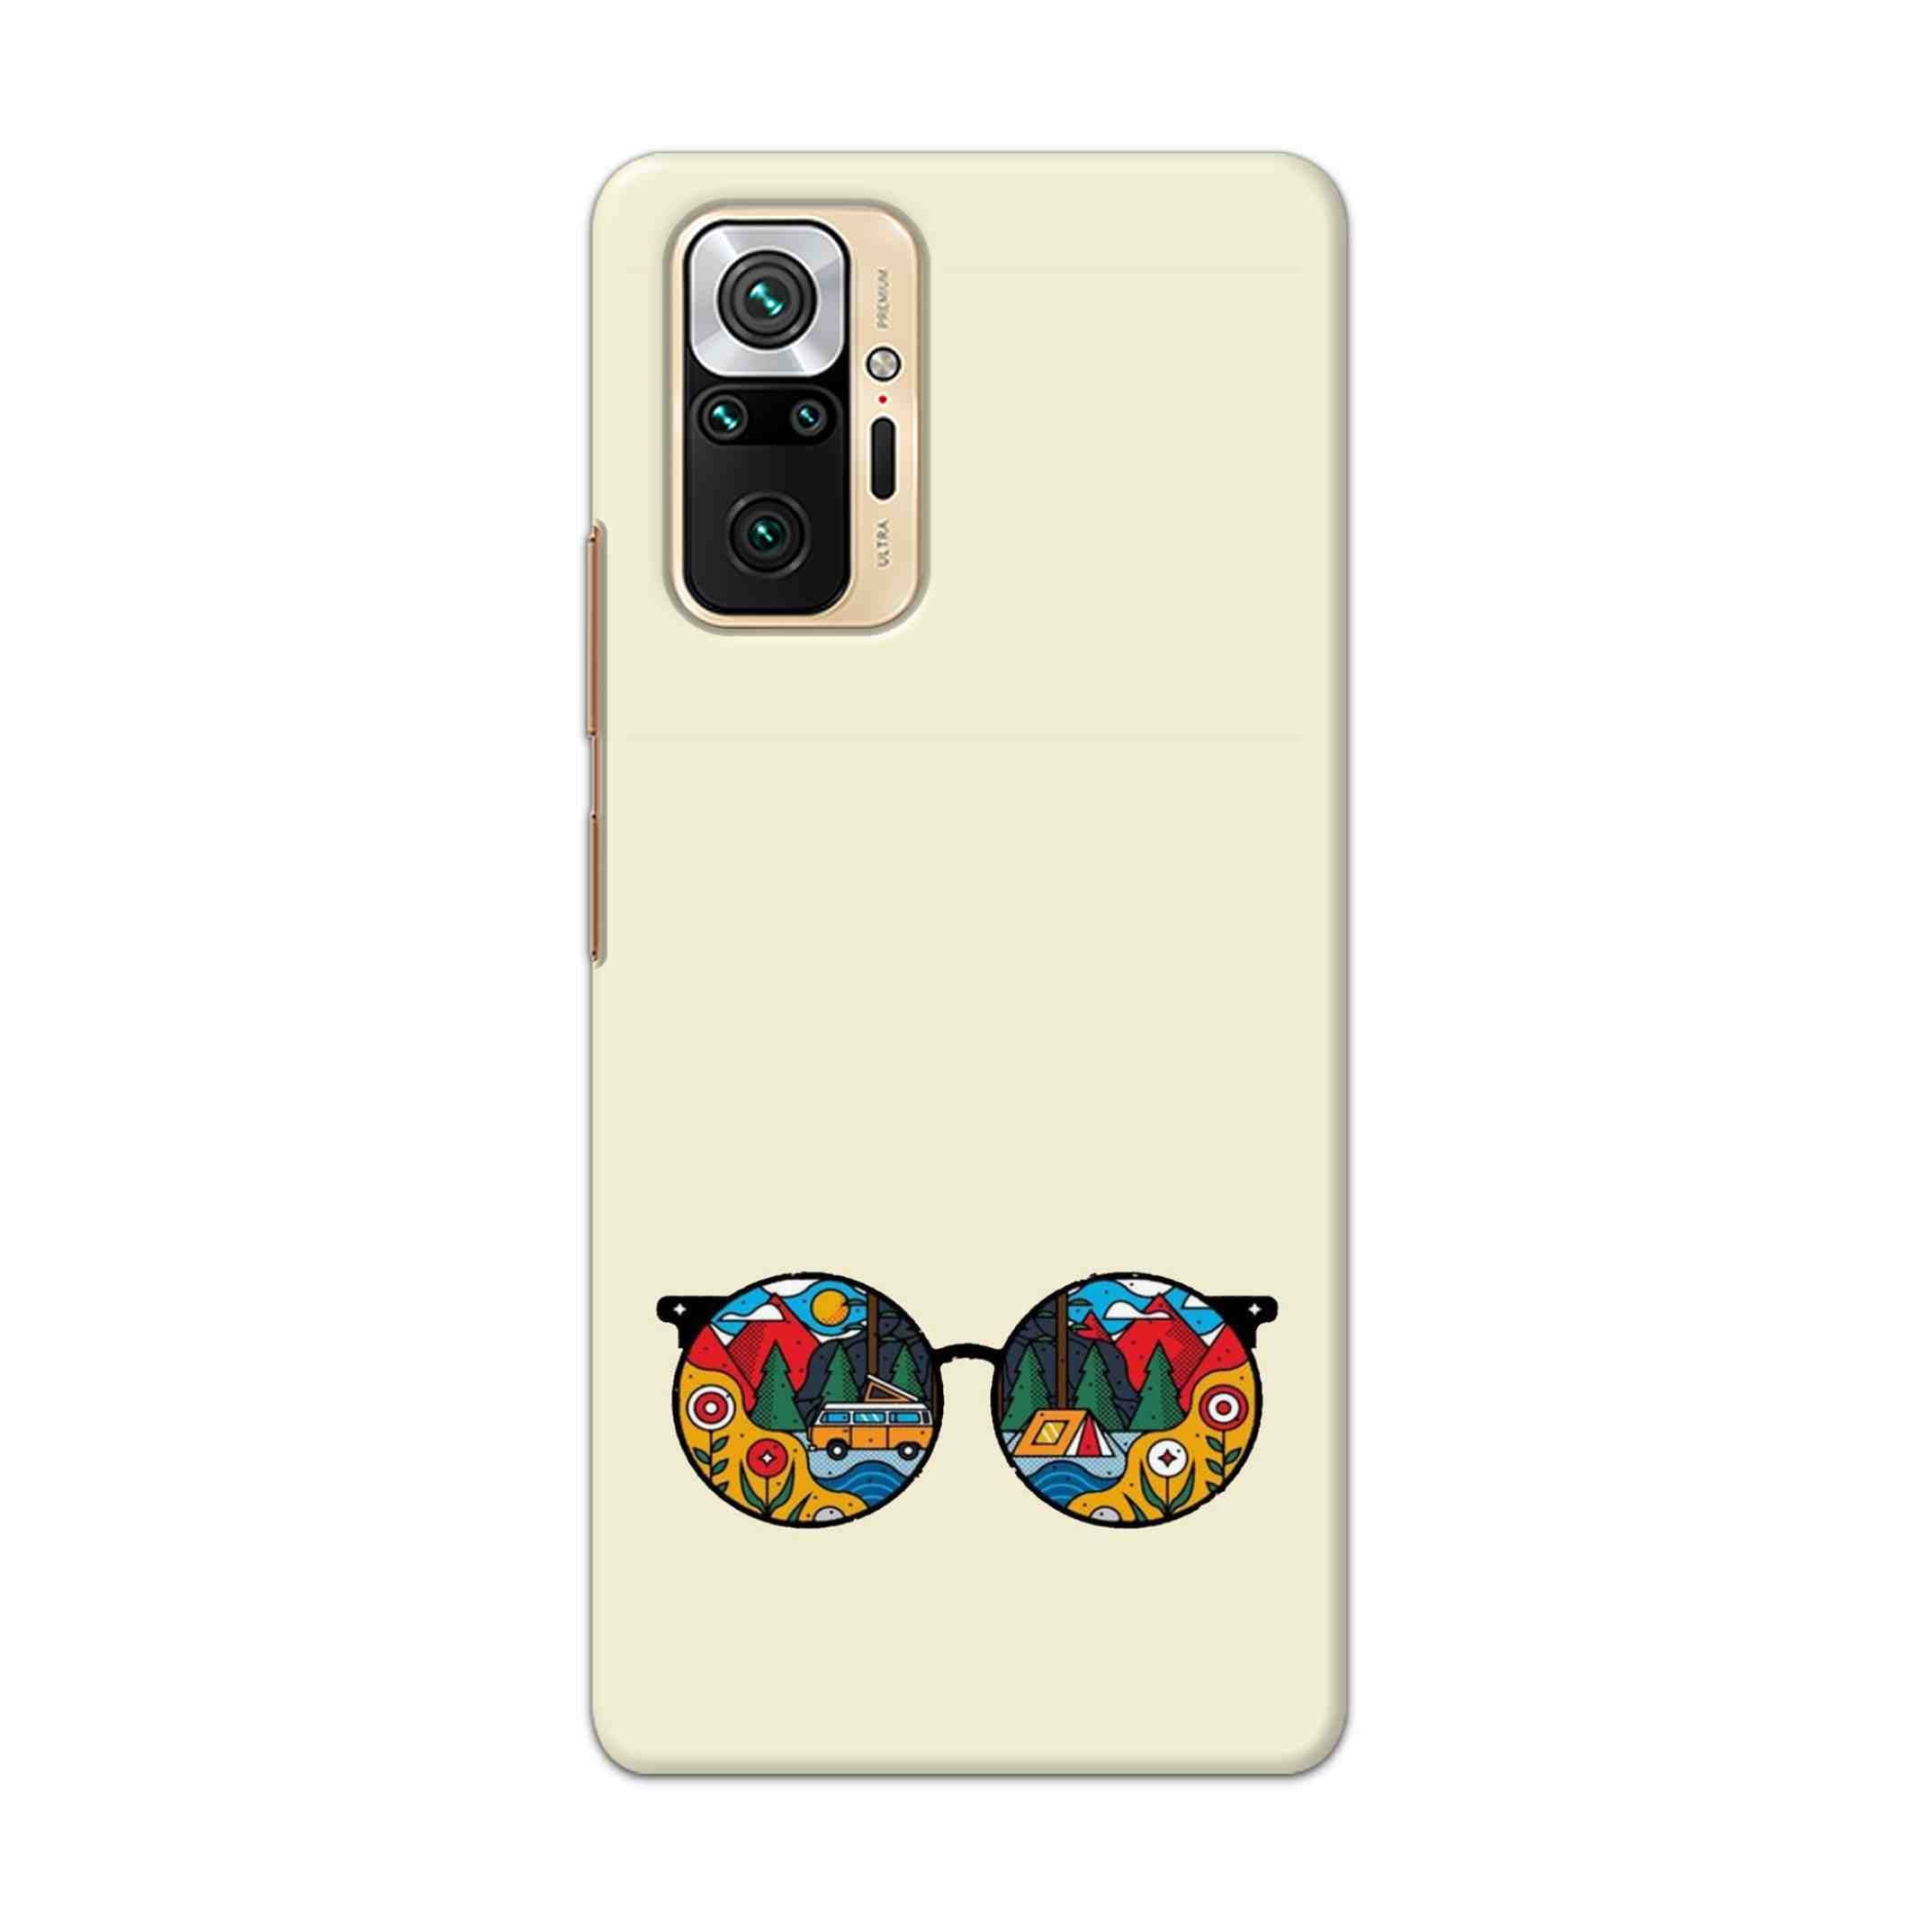 Buy Rainbow Sunglasses Hard Back Mobile Phone Case Cover For Redmi Note 10 Pro Online